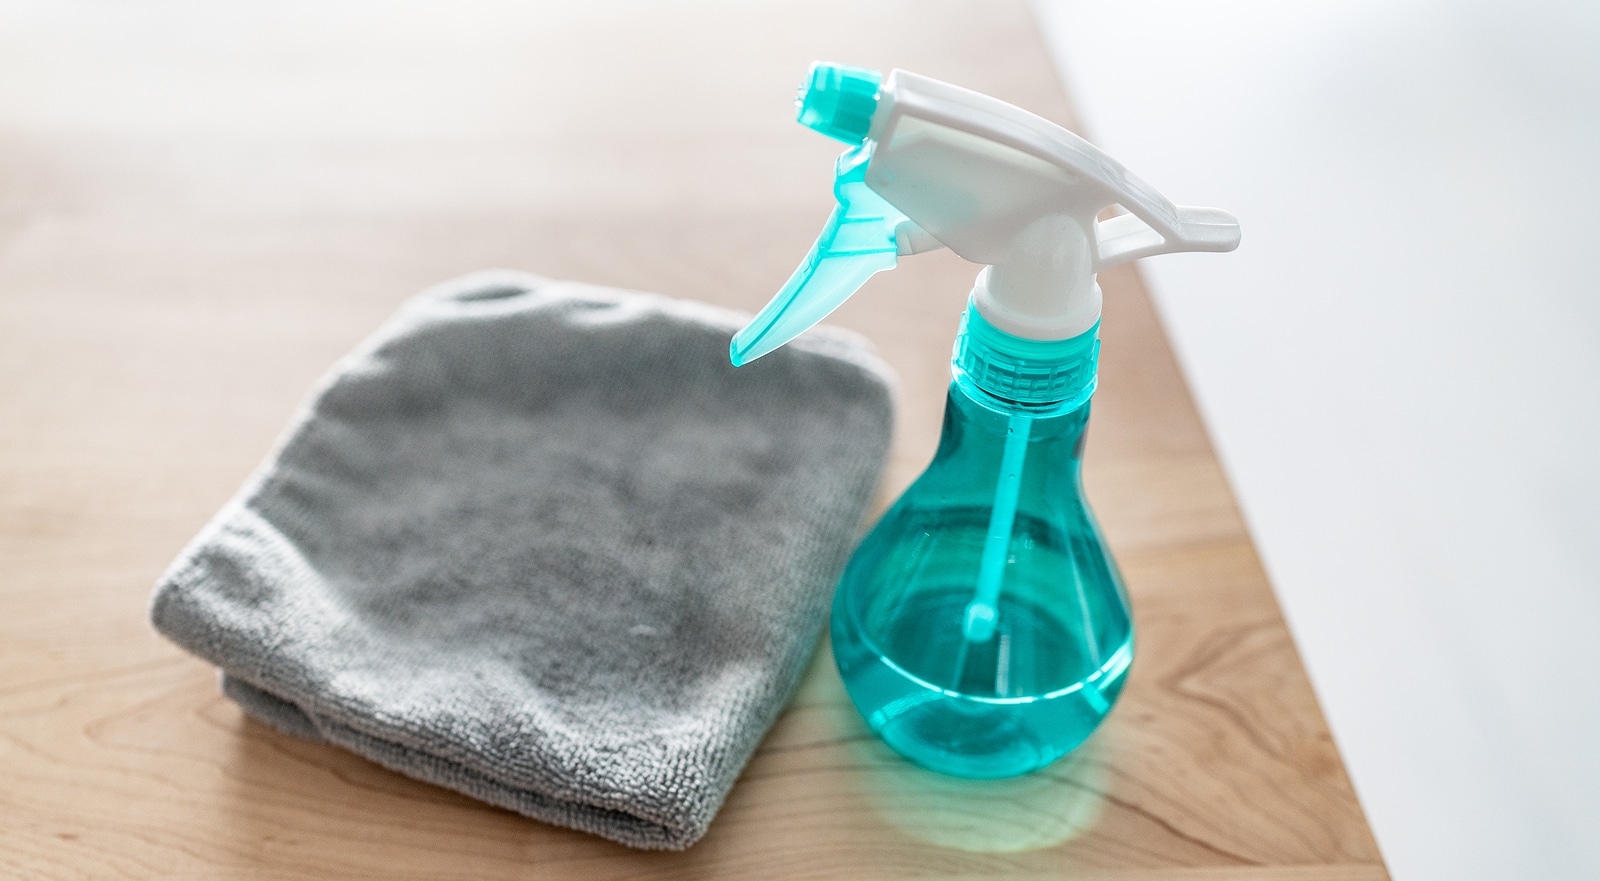 All purpose cleaner disinfectant spray bottle with towel to clea